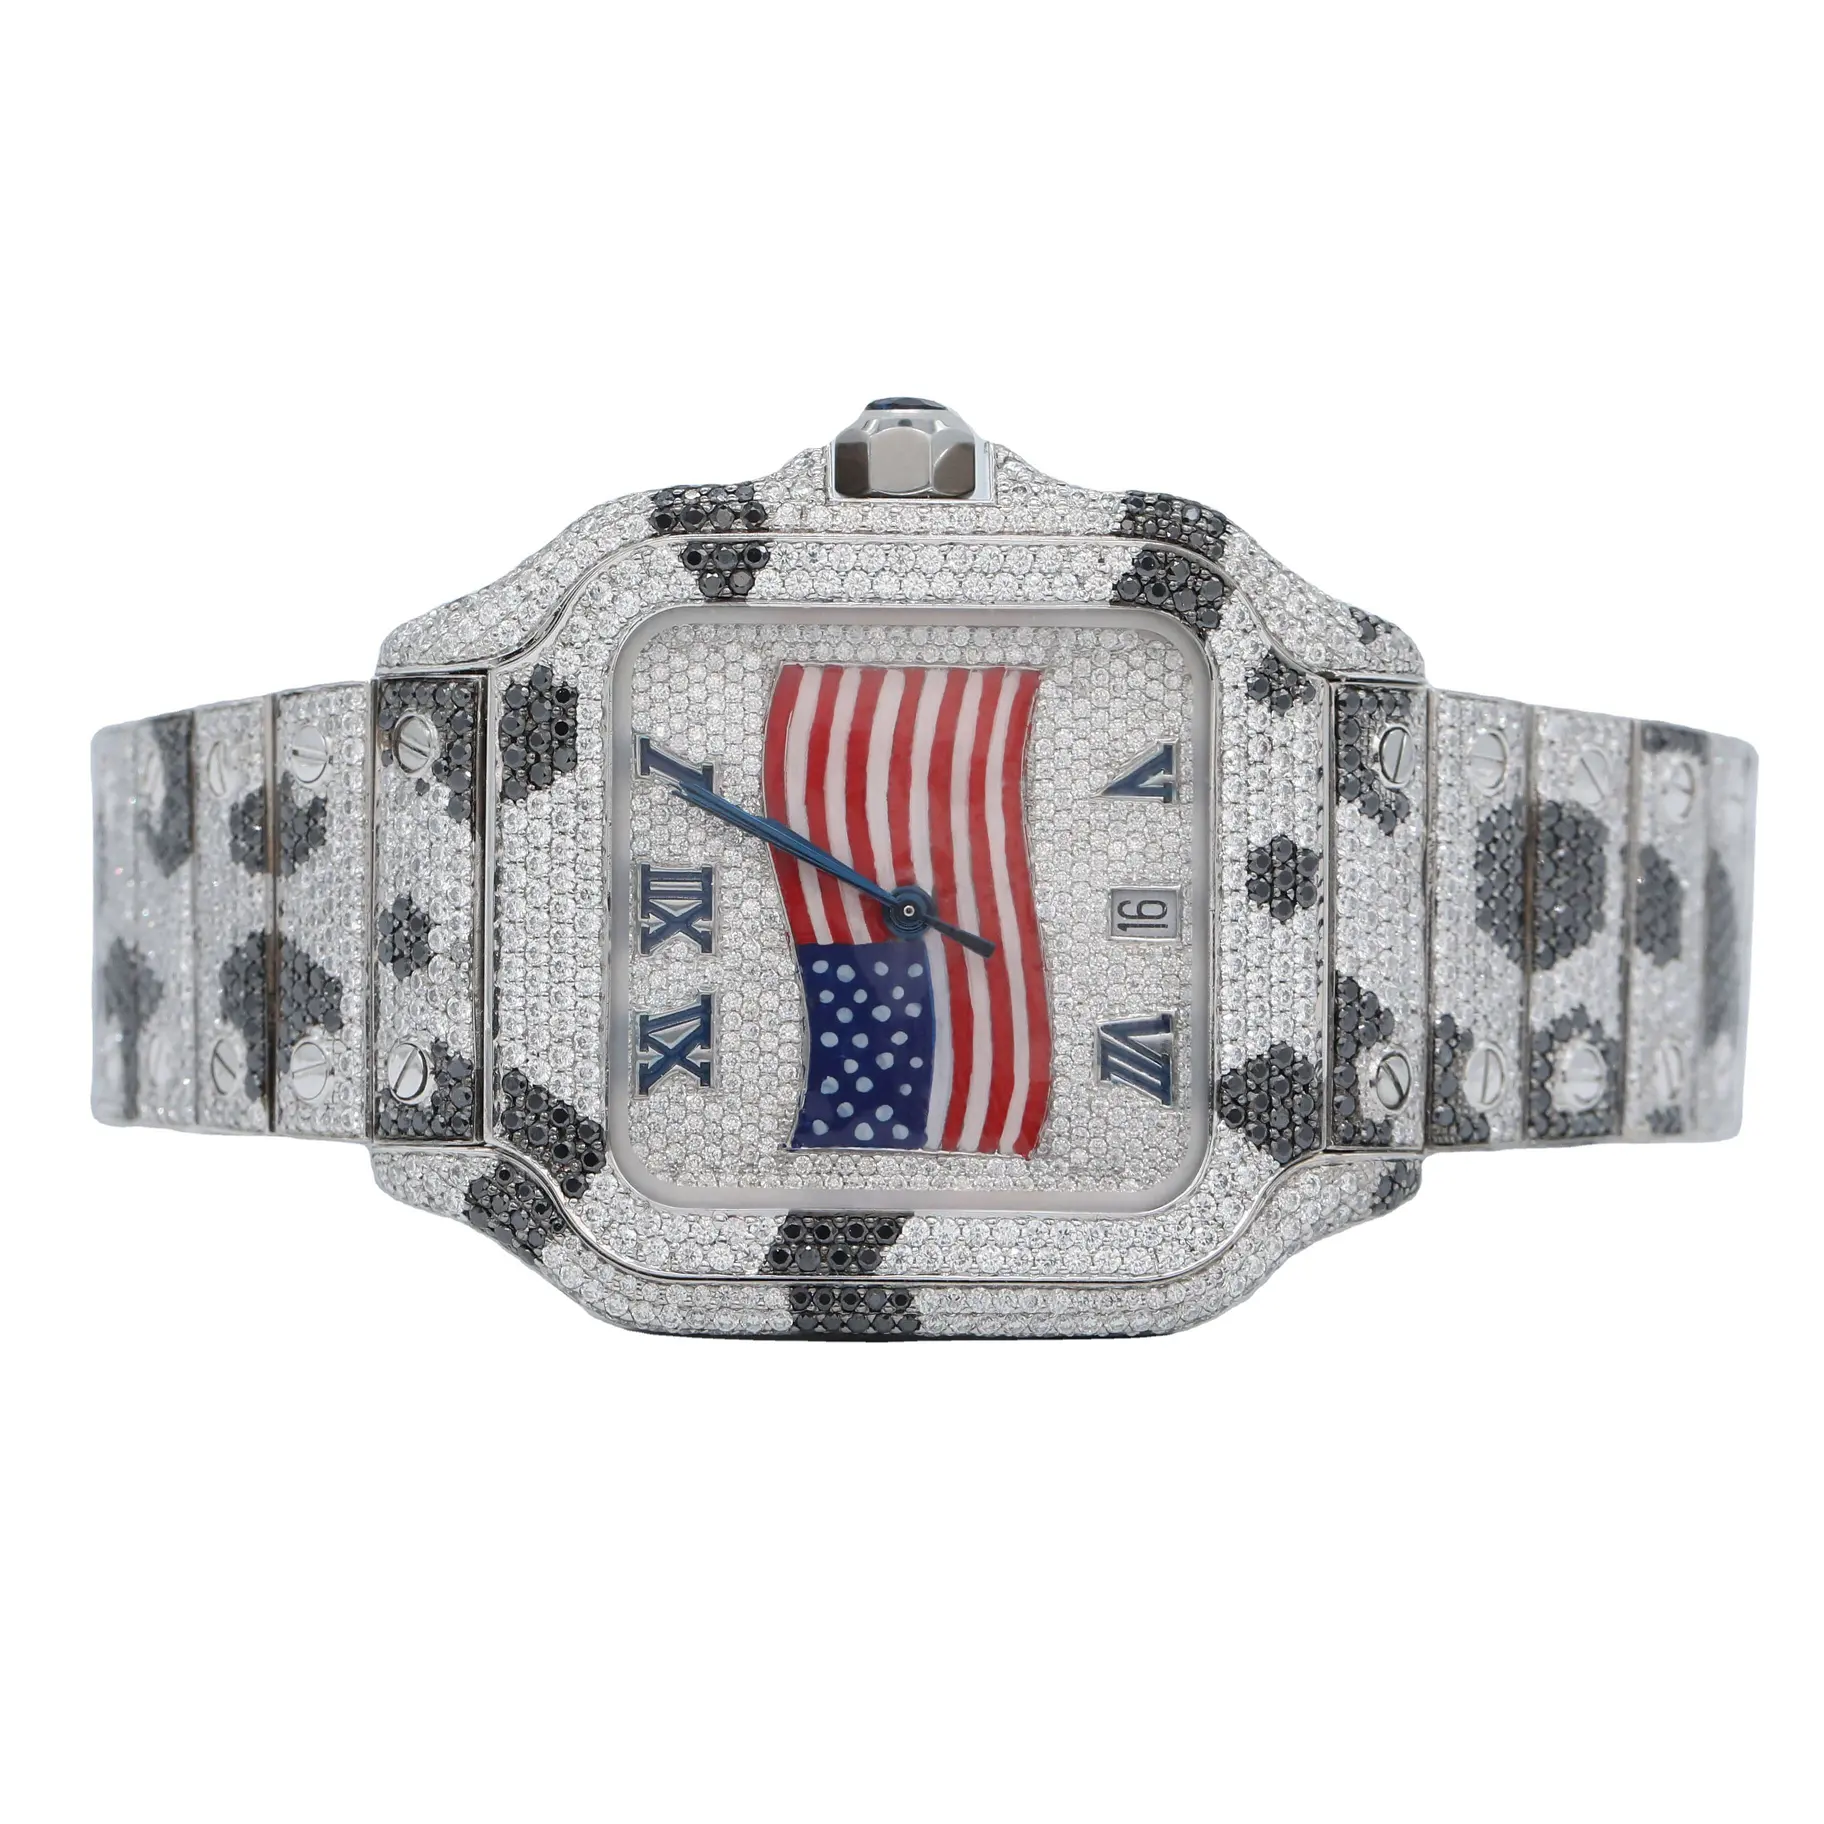 Limited Edition Bicolor Moissanite Diamond Zebra Print Hip Hop Icy Watch with USA Flag Dial Featuring for Men